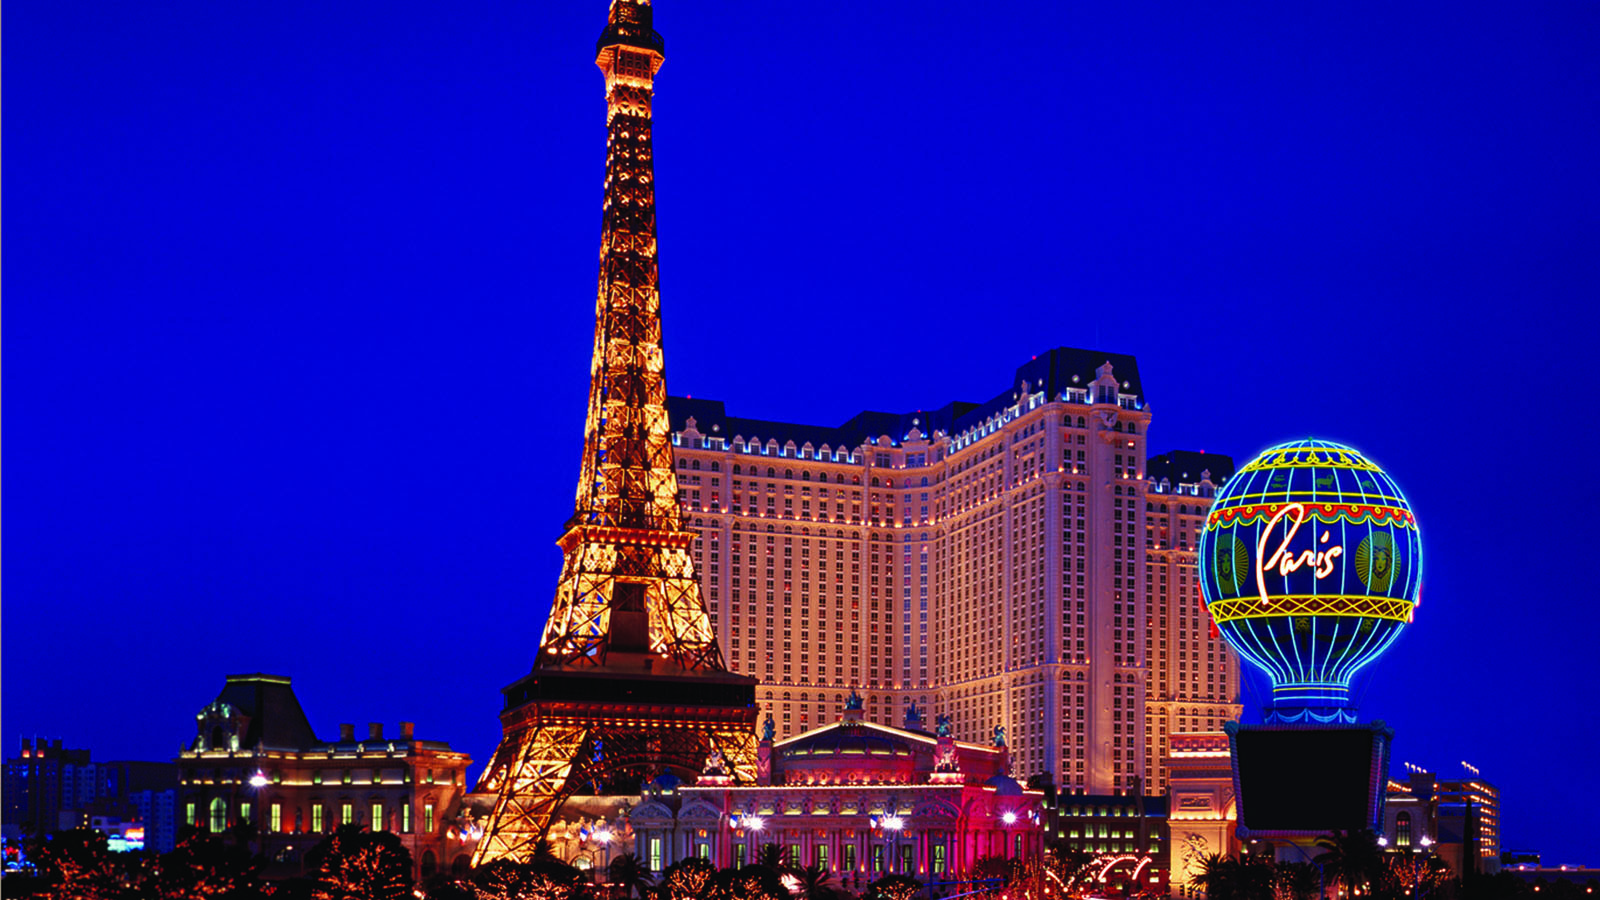 More changes are coming to Las Vegas. Paris Hotel's new Versailles